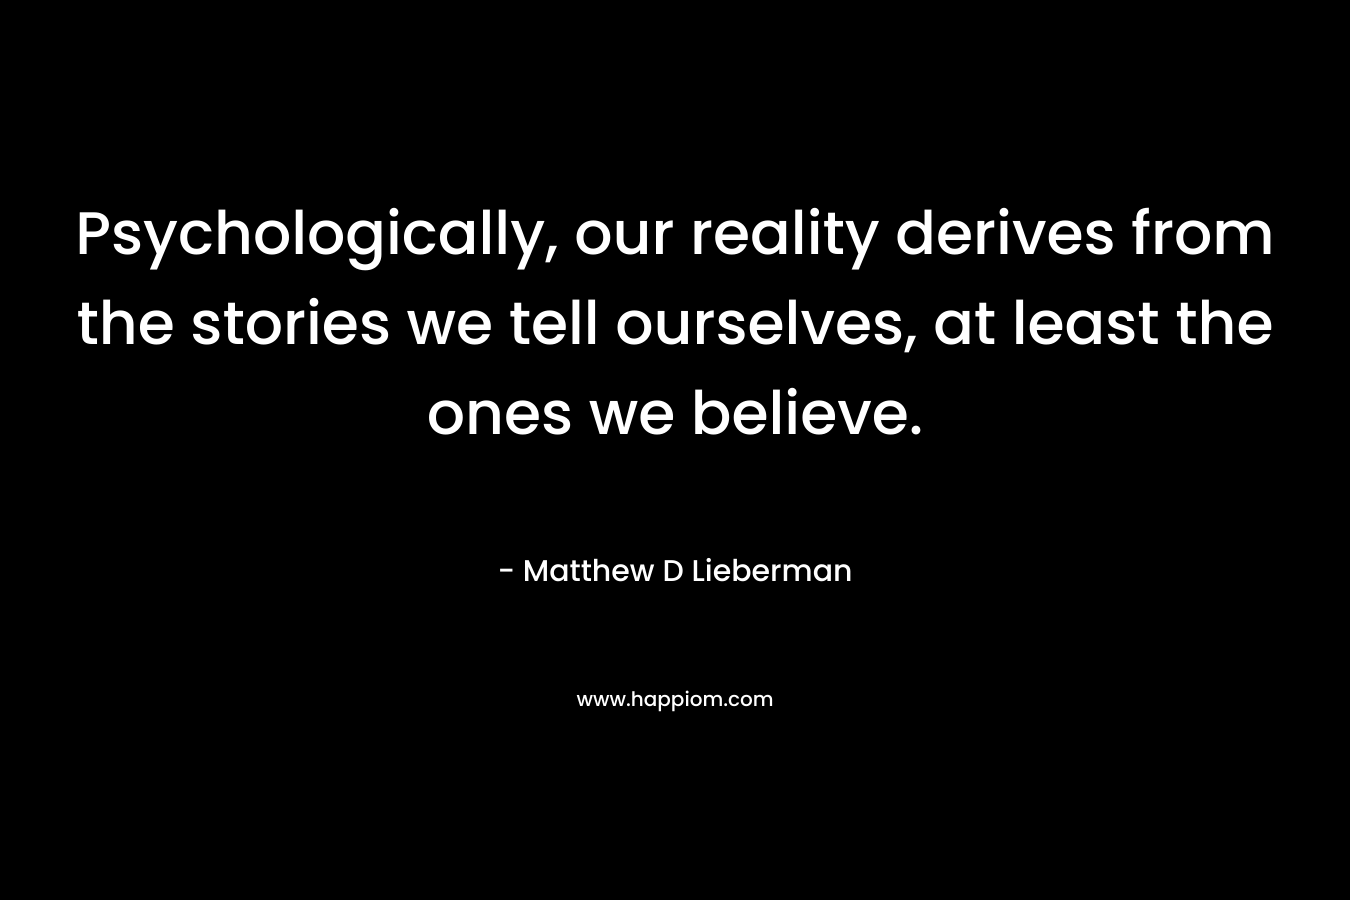 Psychologically, our reality derives from the stories we tell ourselves, at least the ones we believe. – Matthew D Lieberman